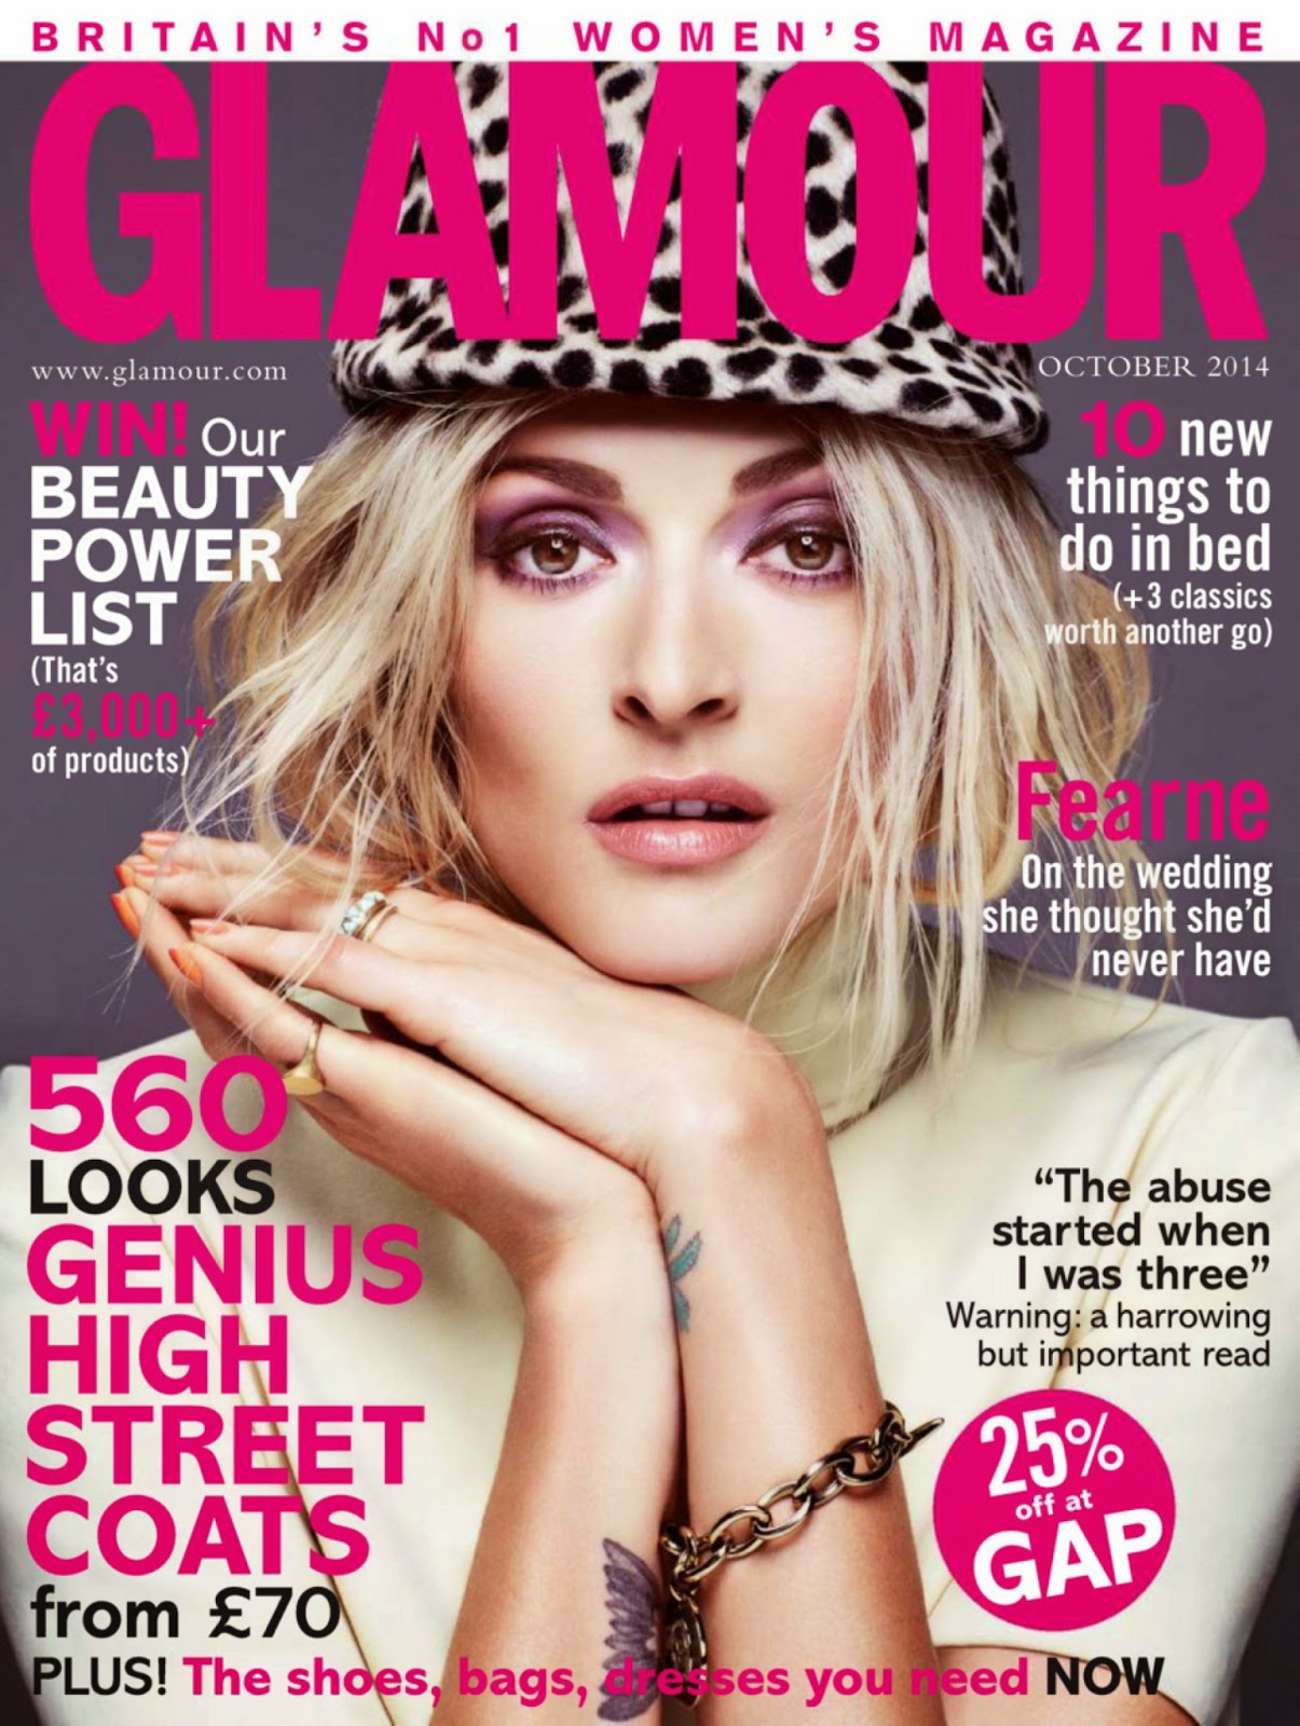 Emma Stone covers Glamour UK February 2013 in a floral 